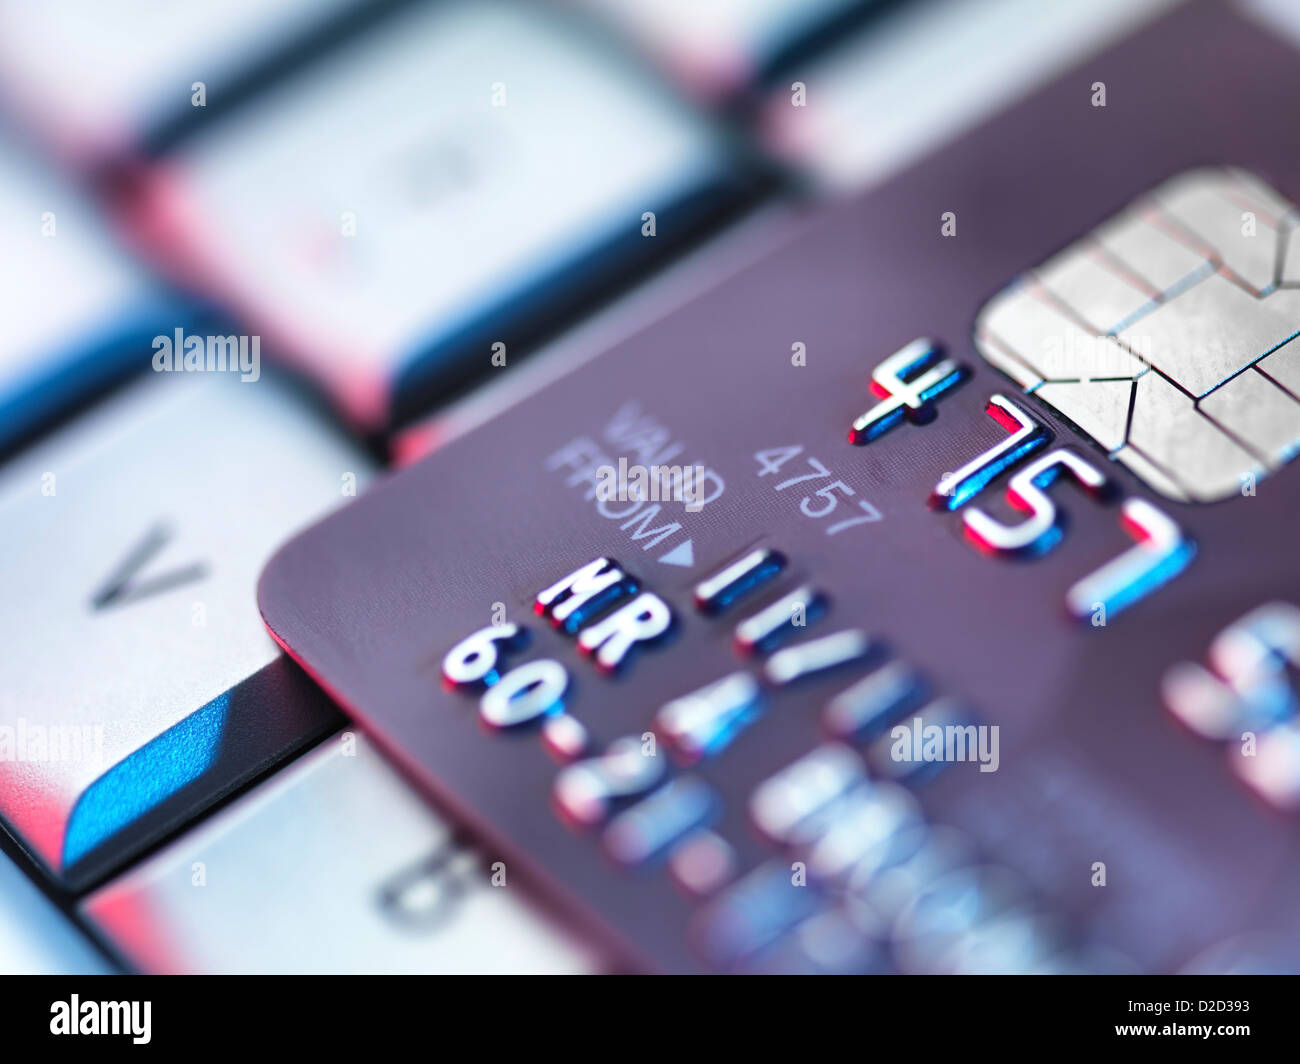 Internet shopping conceptual image Credit card on a computer keyboard Stock Photo